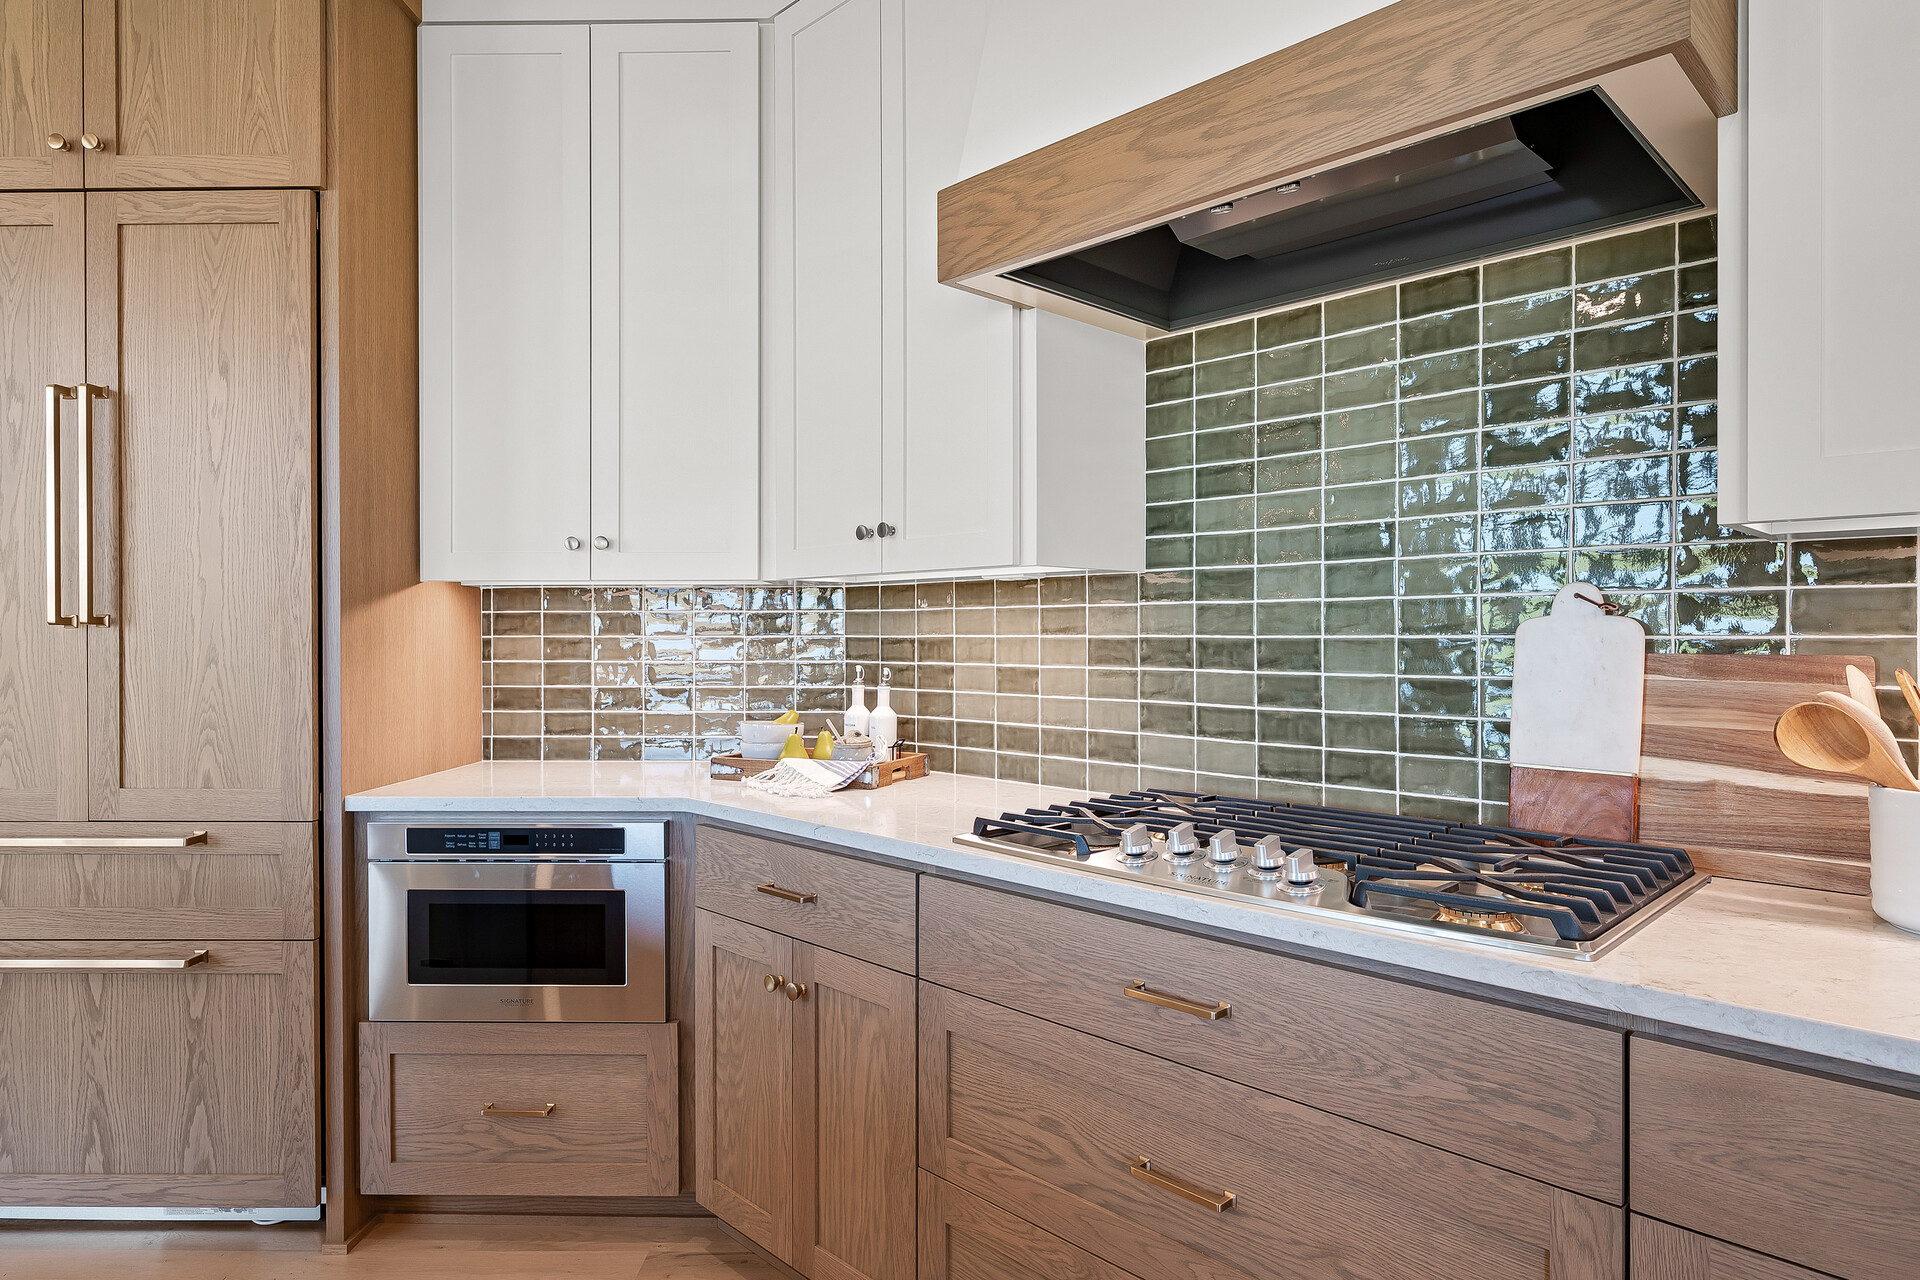 A prairie transitional kitchen with wood cabinets and tiled backsplash in a custom home.